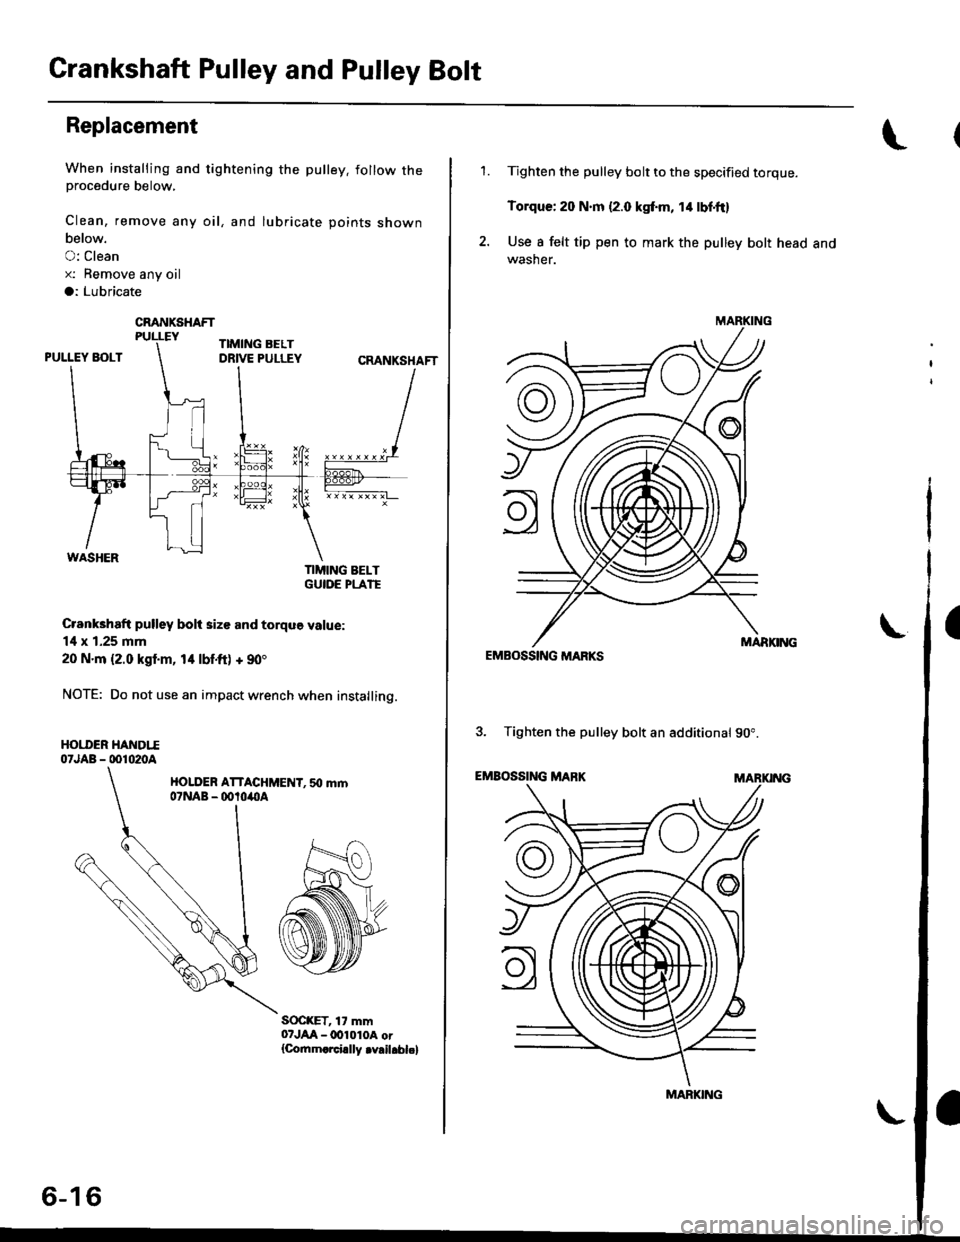 HONDA CIVIC 1998 6.G Owners Manual Crankshaft Pulley and Pulley Bolt
Replacement
When installing and tightening the pulley. follow theprocedure below,
Clean, remove any oil, and lubricate points shown
below.
O: Clean
x: Bemove any oil
